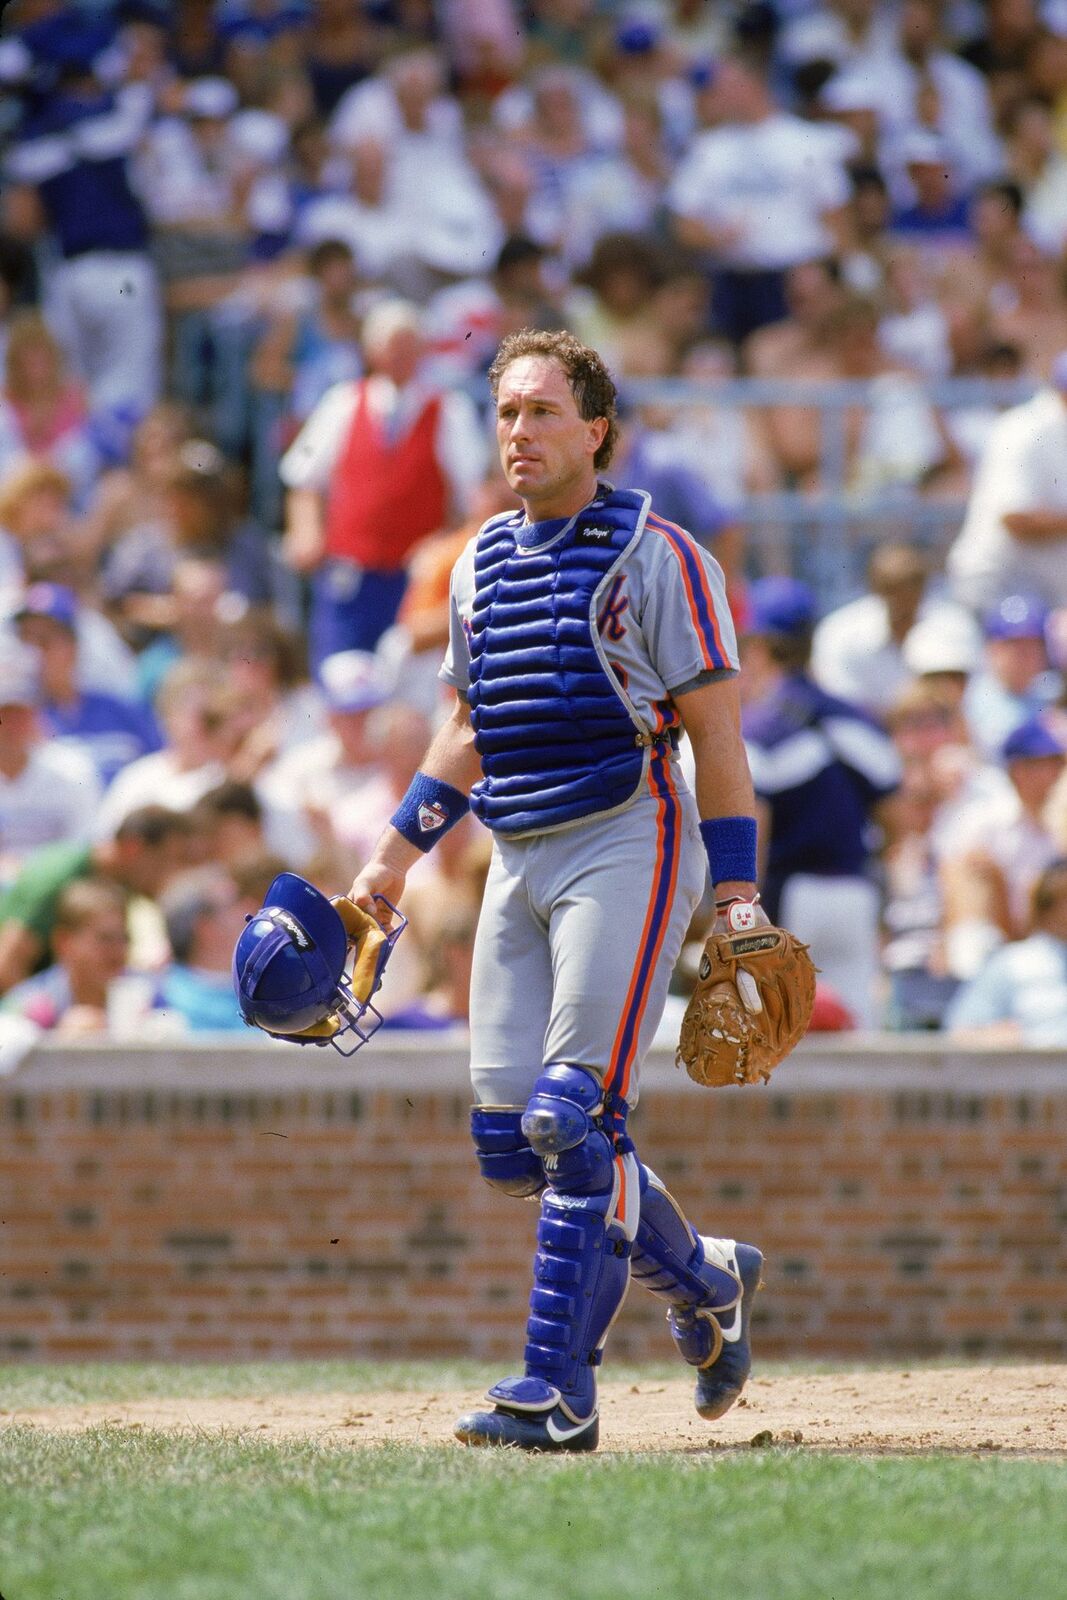 Gary Carter in catcher's gear during an MLB game at Wrigley Field in Chicago, Illinois | Source: Getty Images